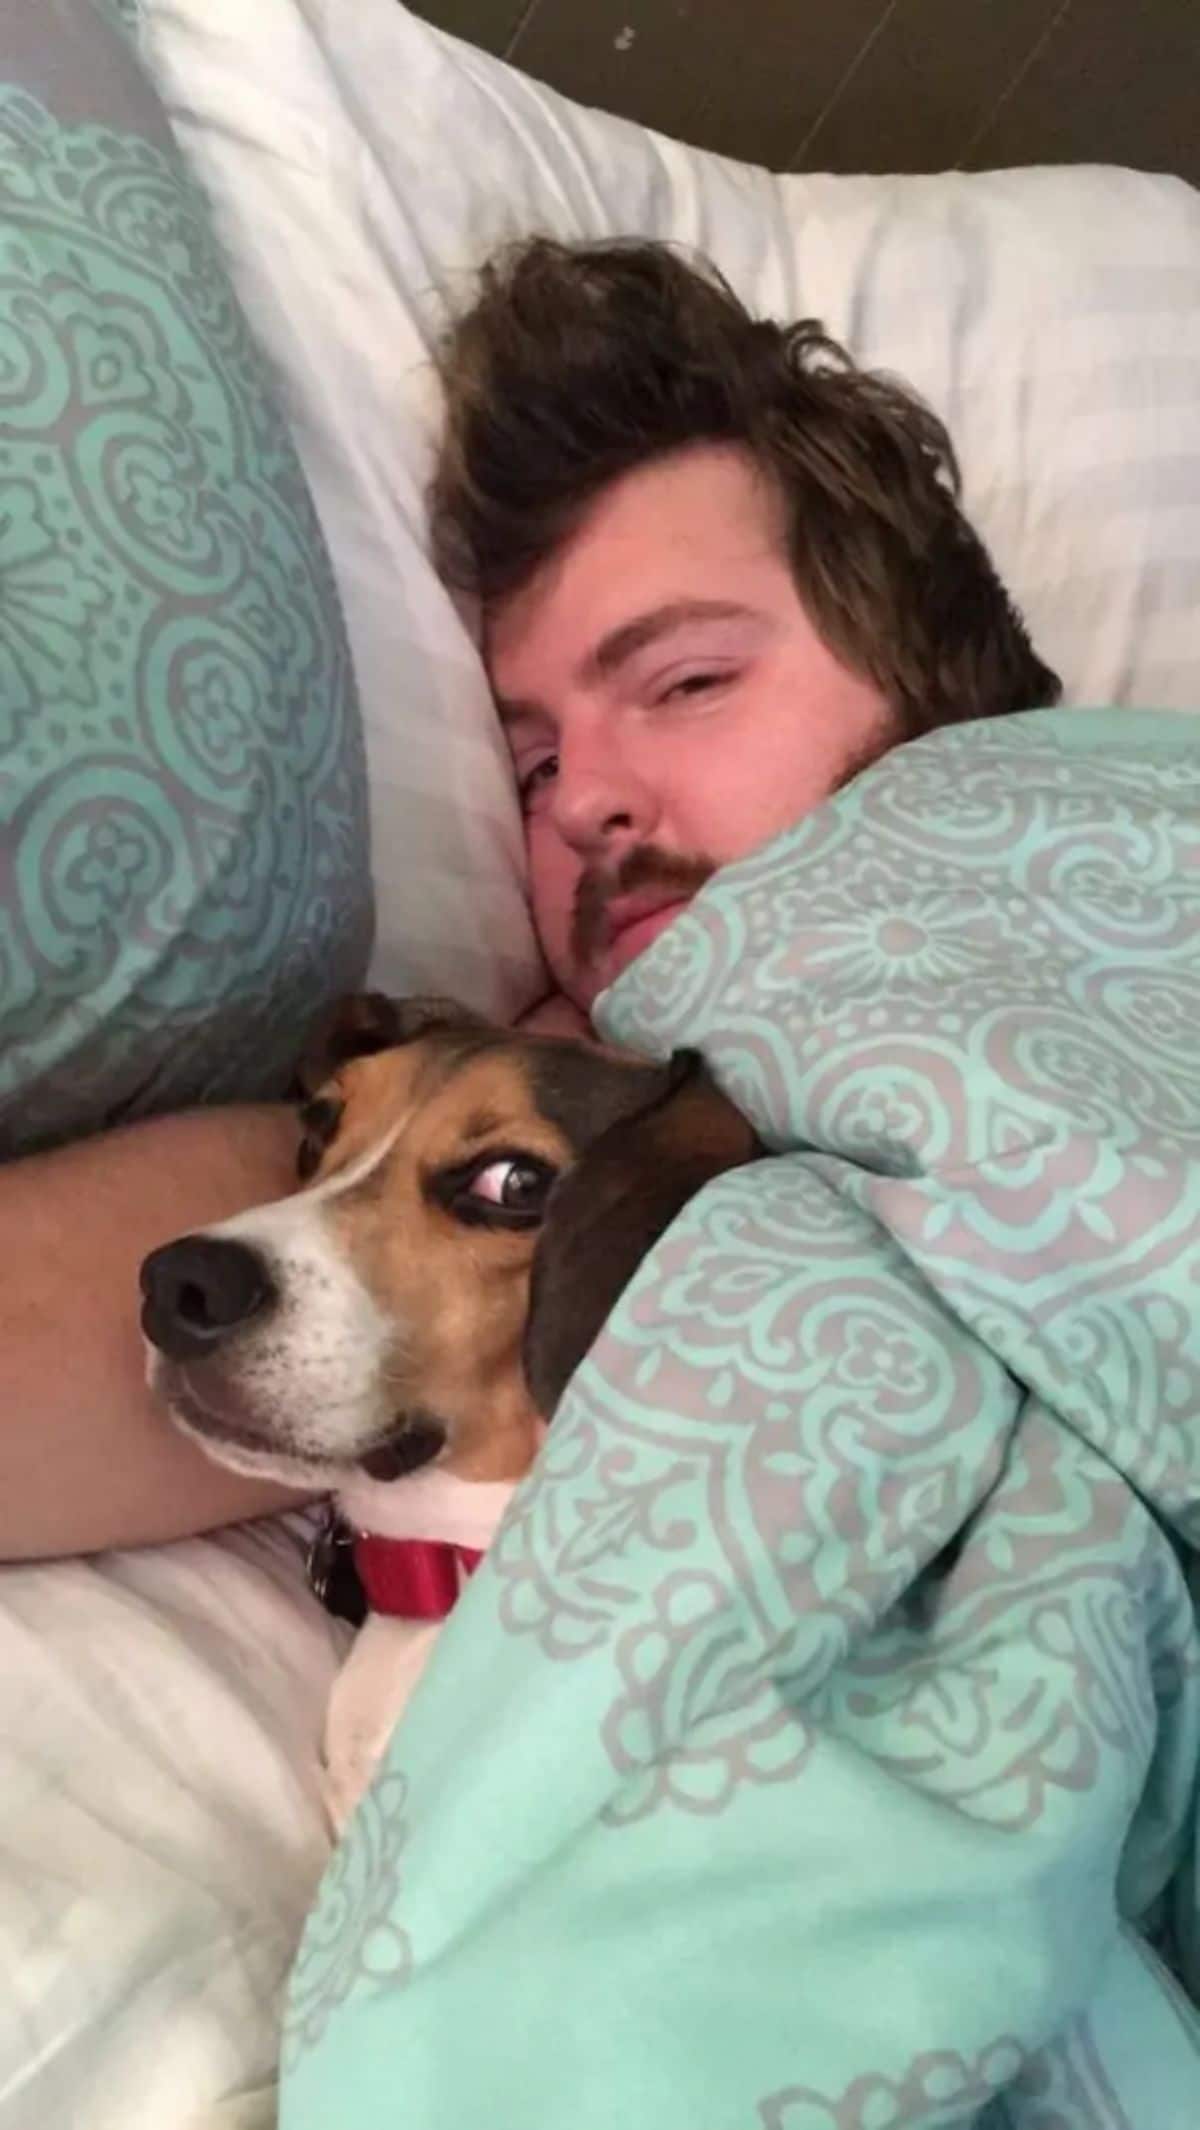 black brown and white dog cuddled in bed under a green and brown blanket with a man